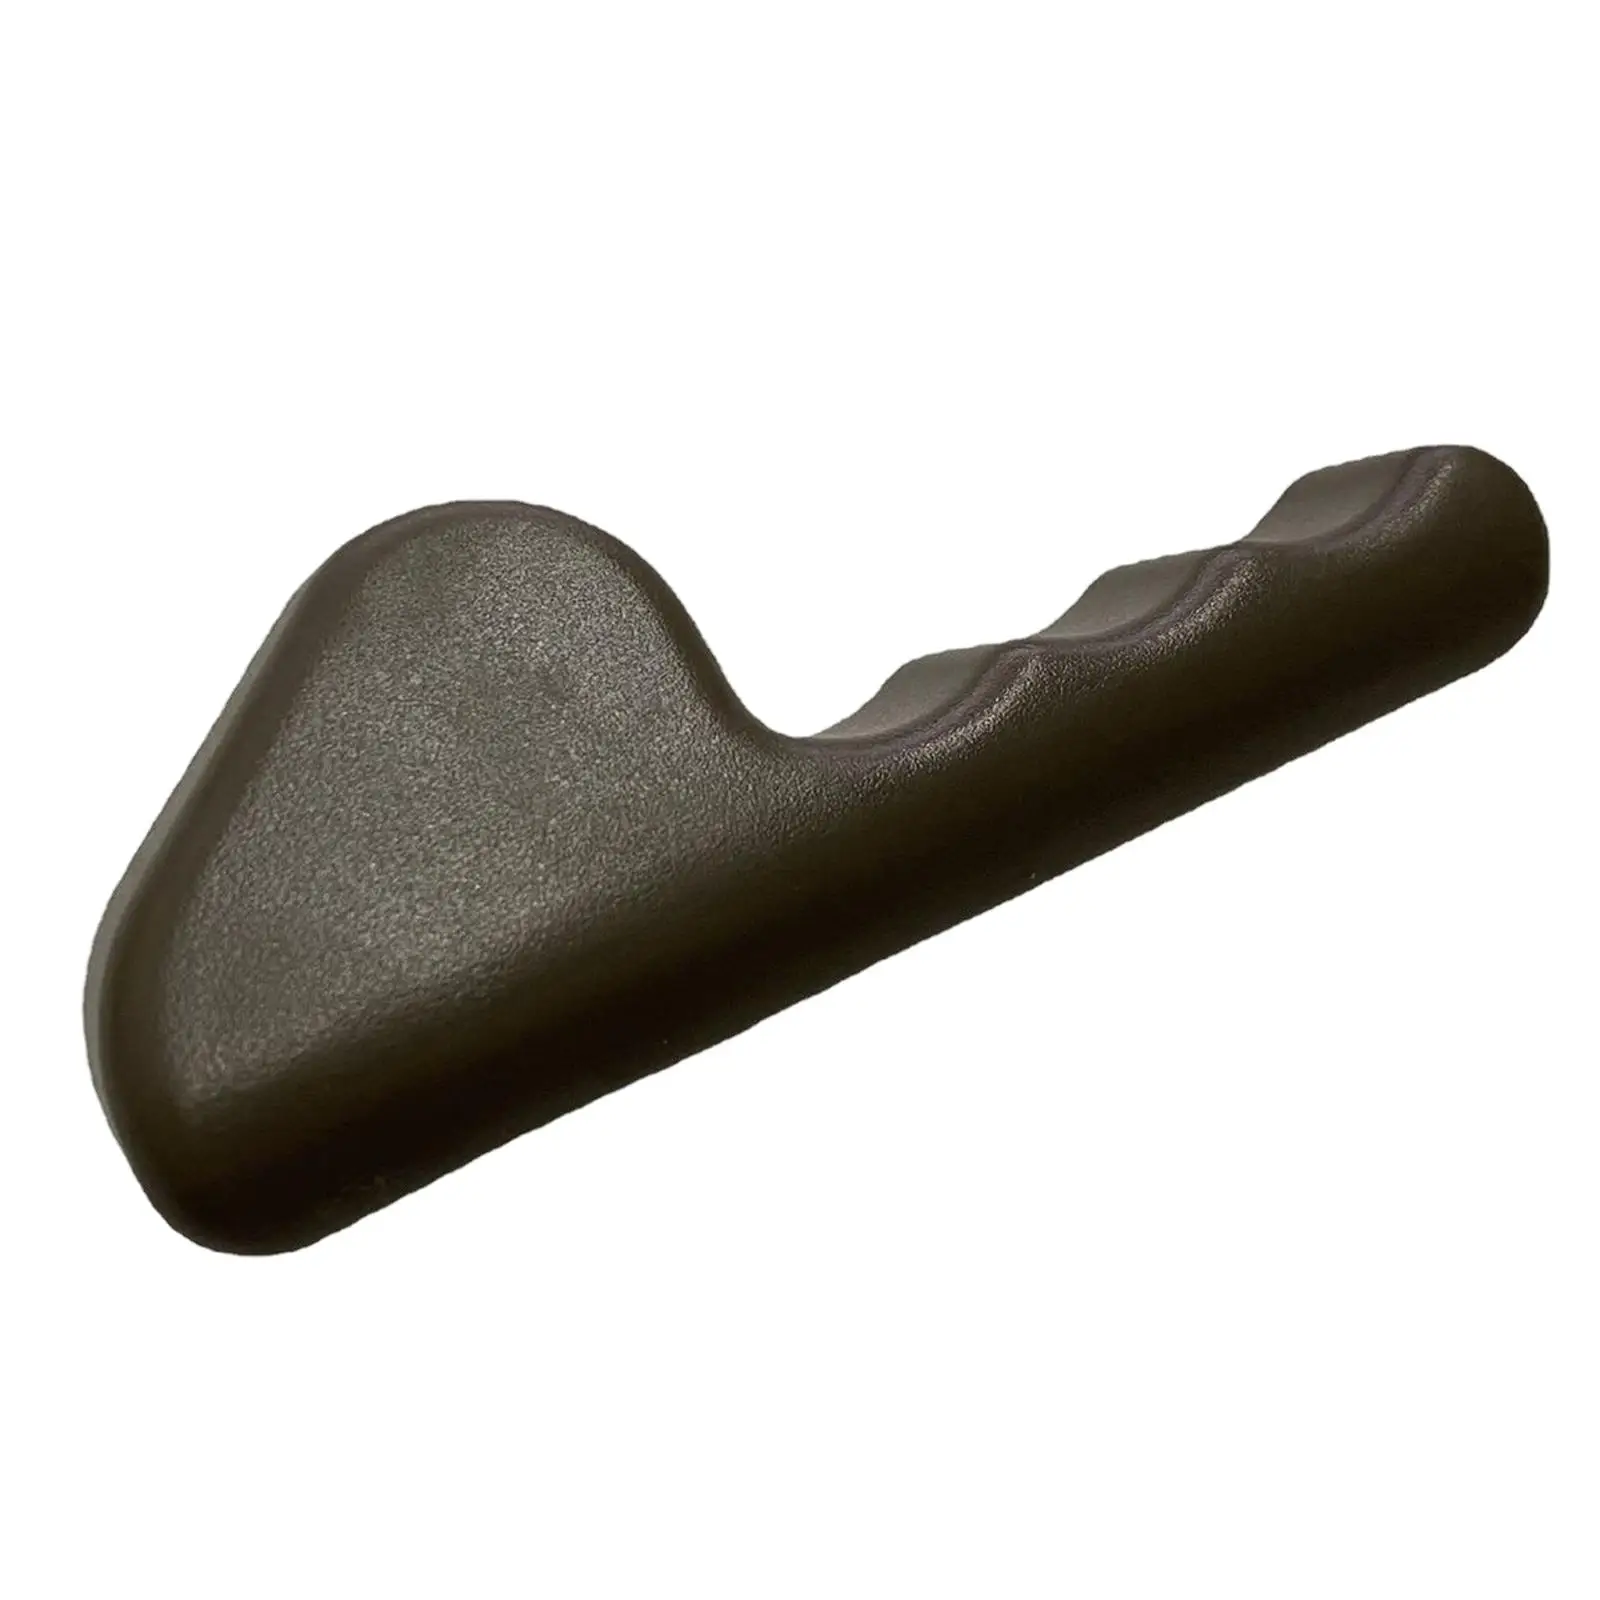 Seat recliner Lever Handle Left Front Accessory for Mountaineer